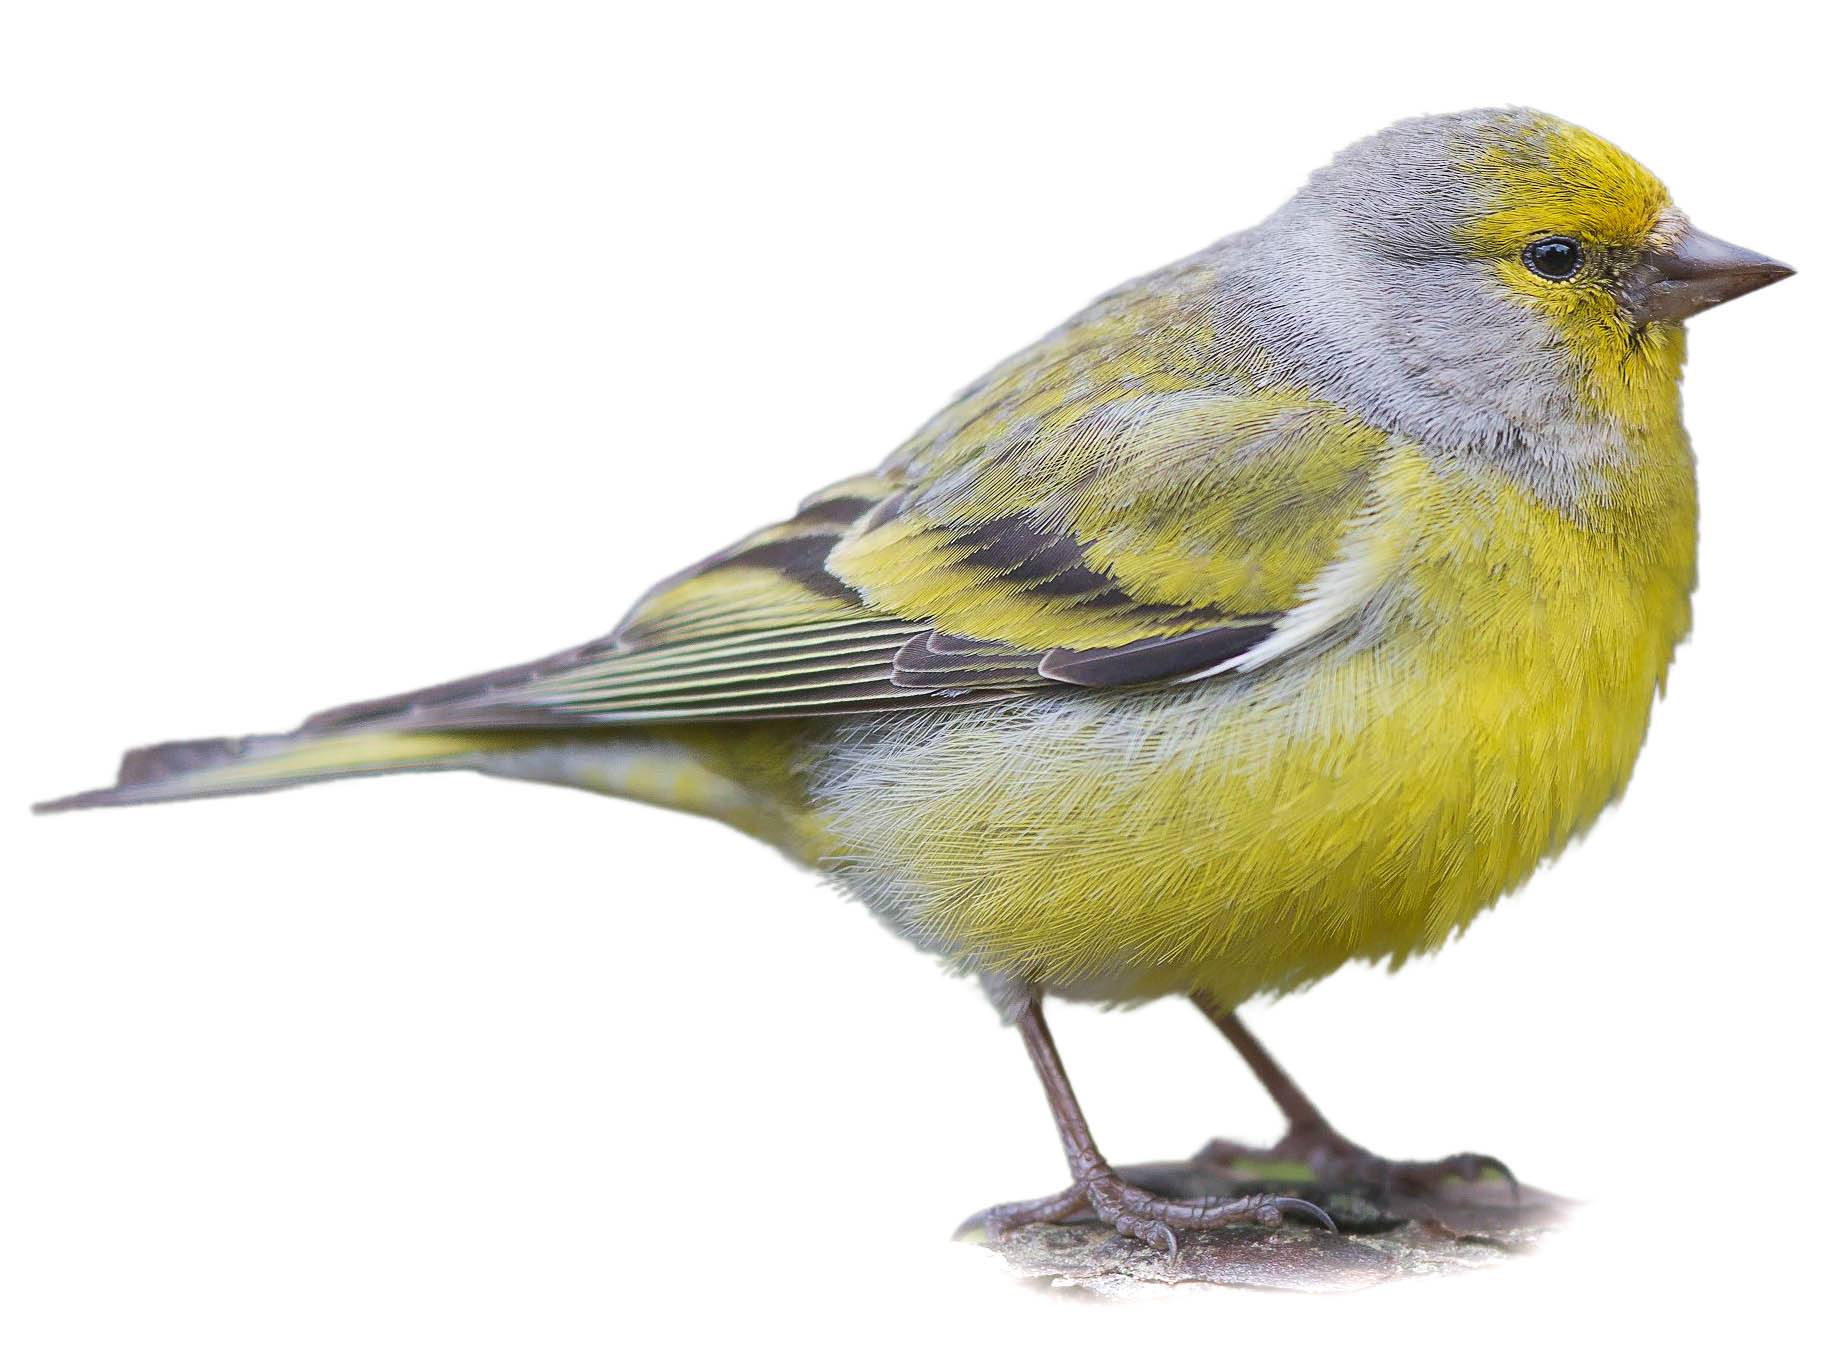 A photo of a Citril Finch (Carduelis citrinella), male